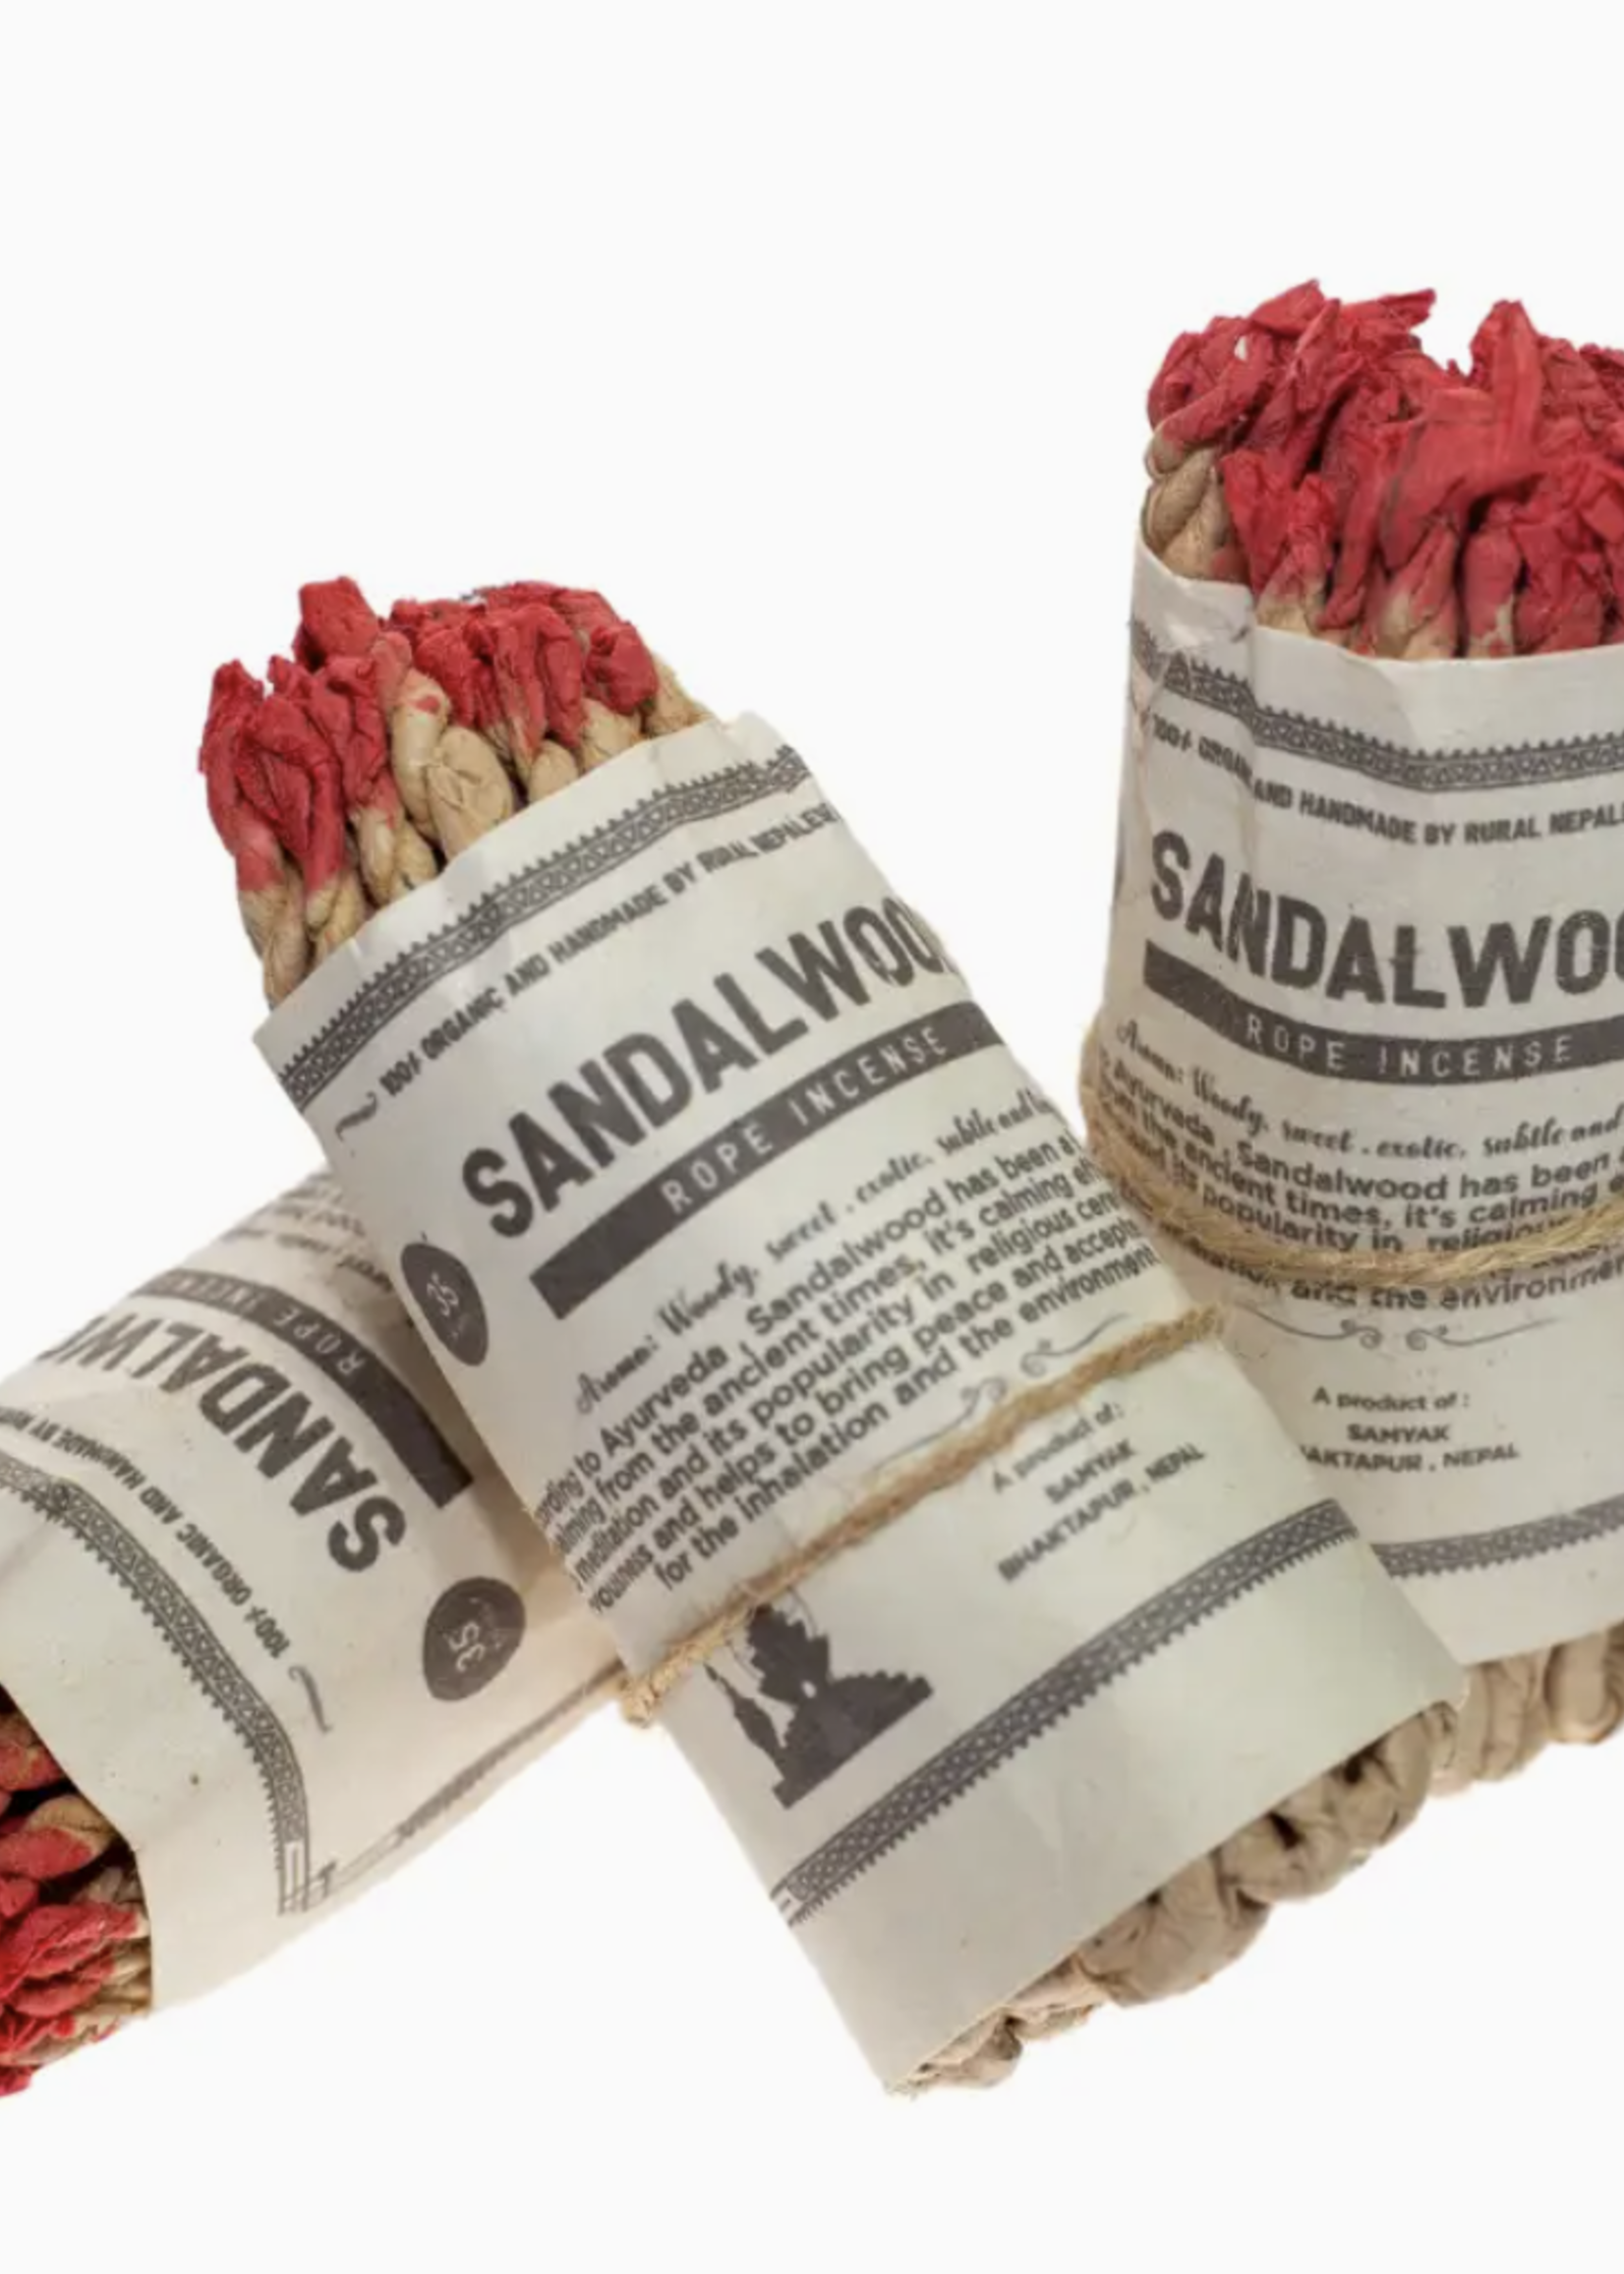 Down to Earth Sandalwood Rope Incense